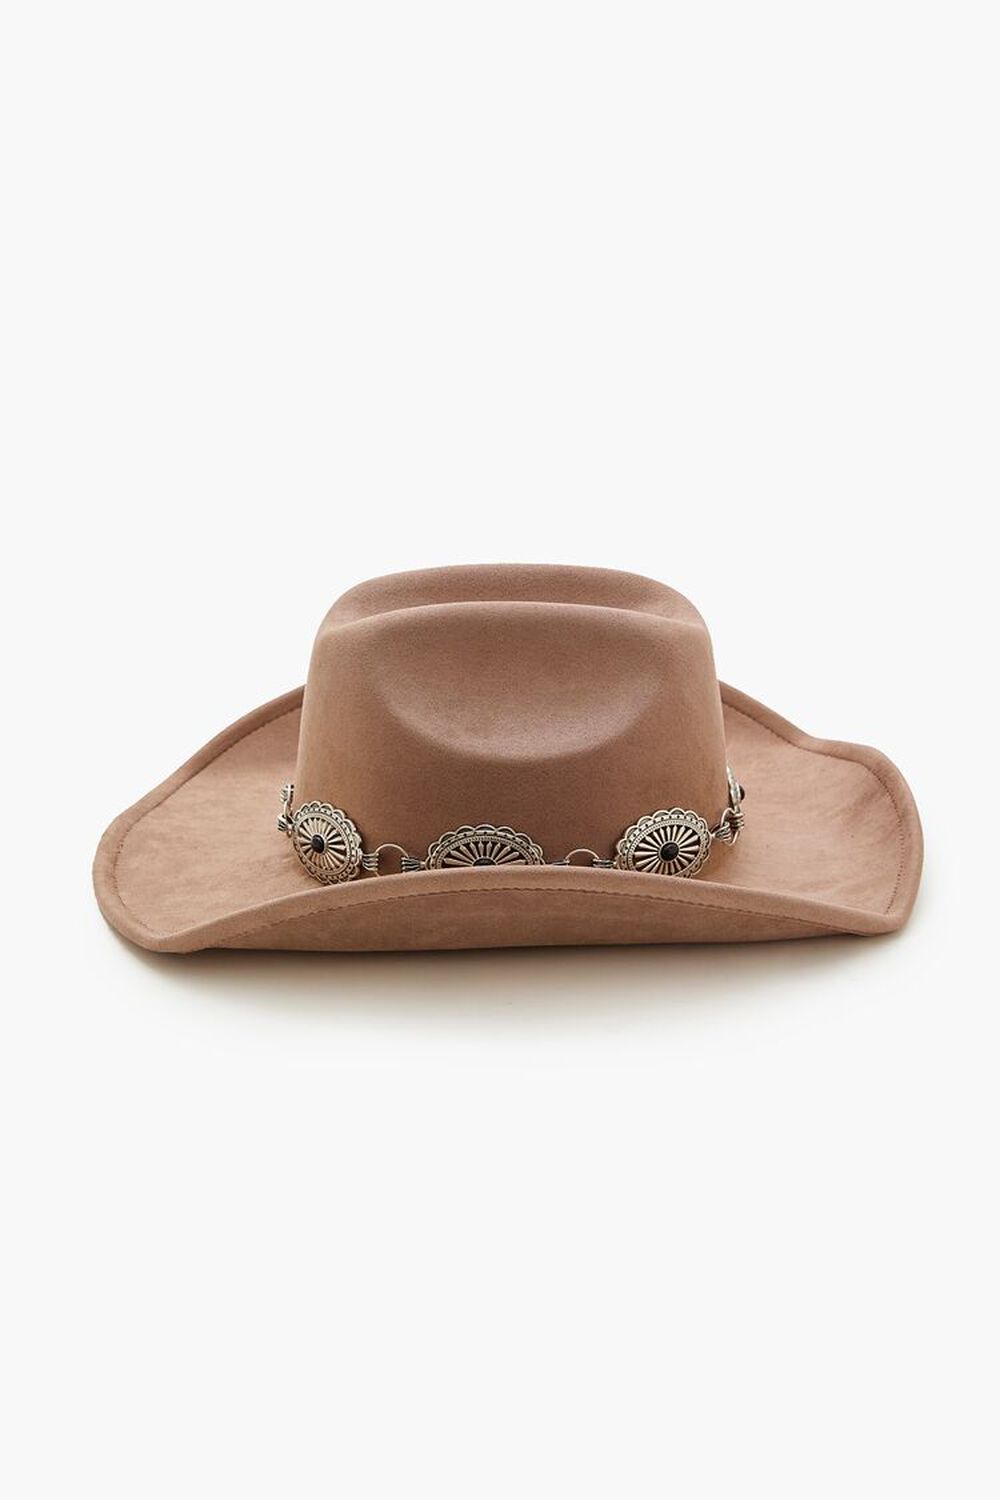 TAUPE/SILVER Faux Stone Chain Cowboy Hat, image 3